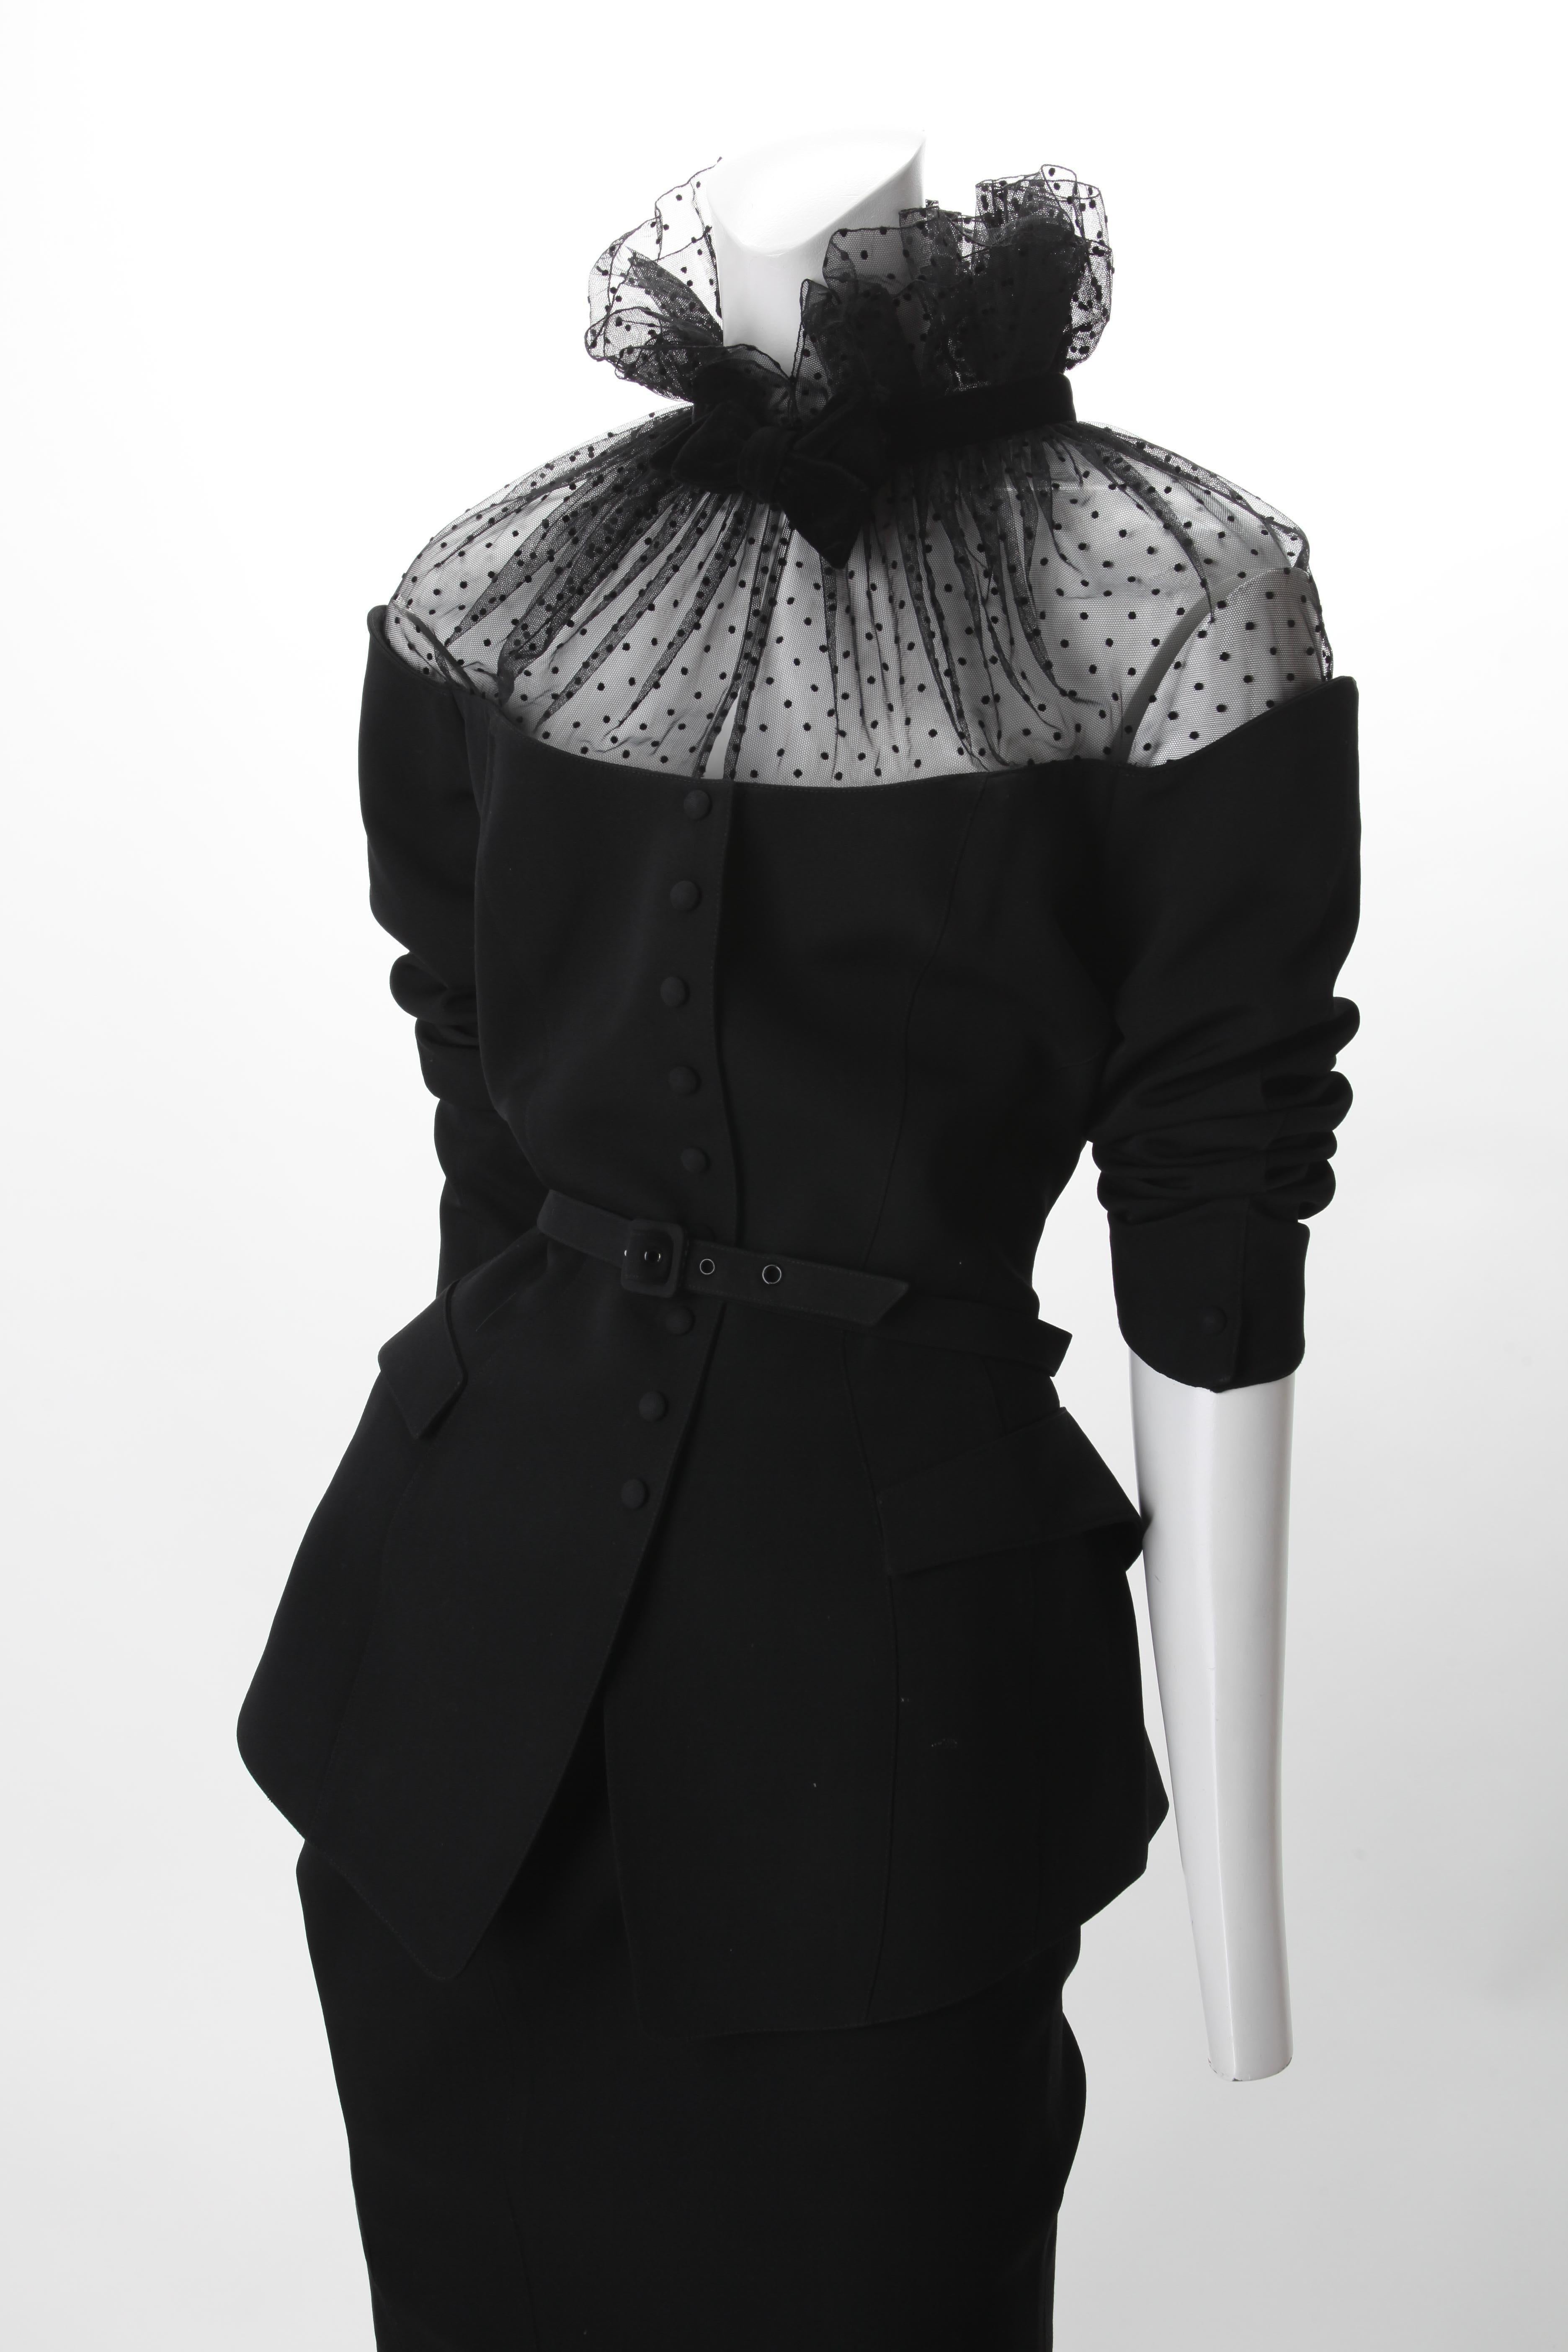 1990s Thierry Mugler Black Suit with Net Yoke. Features gathered net yoke with ruffle stand collar and velvet trim. Button down front closure with matching belt.